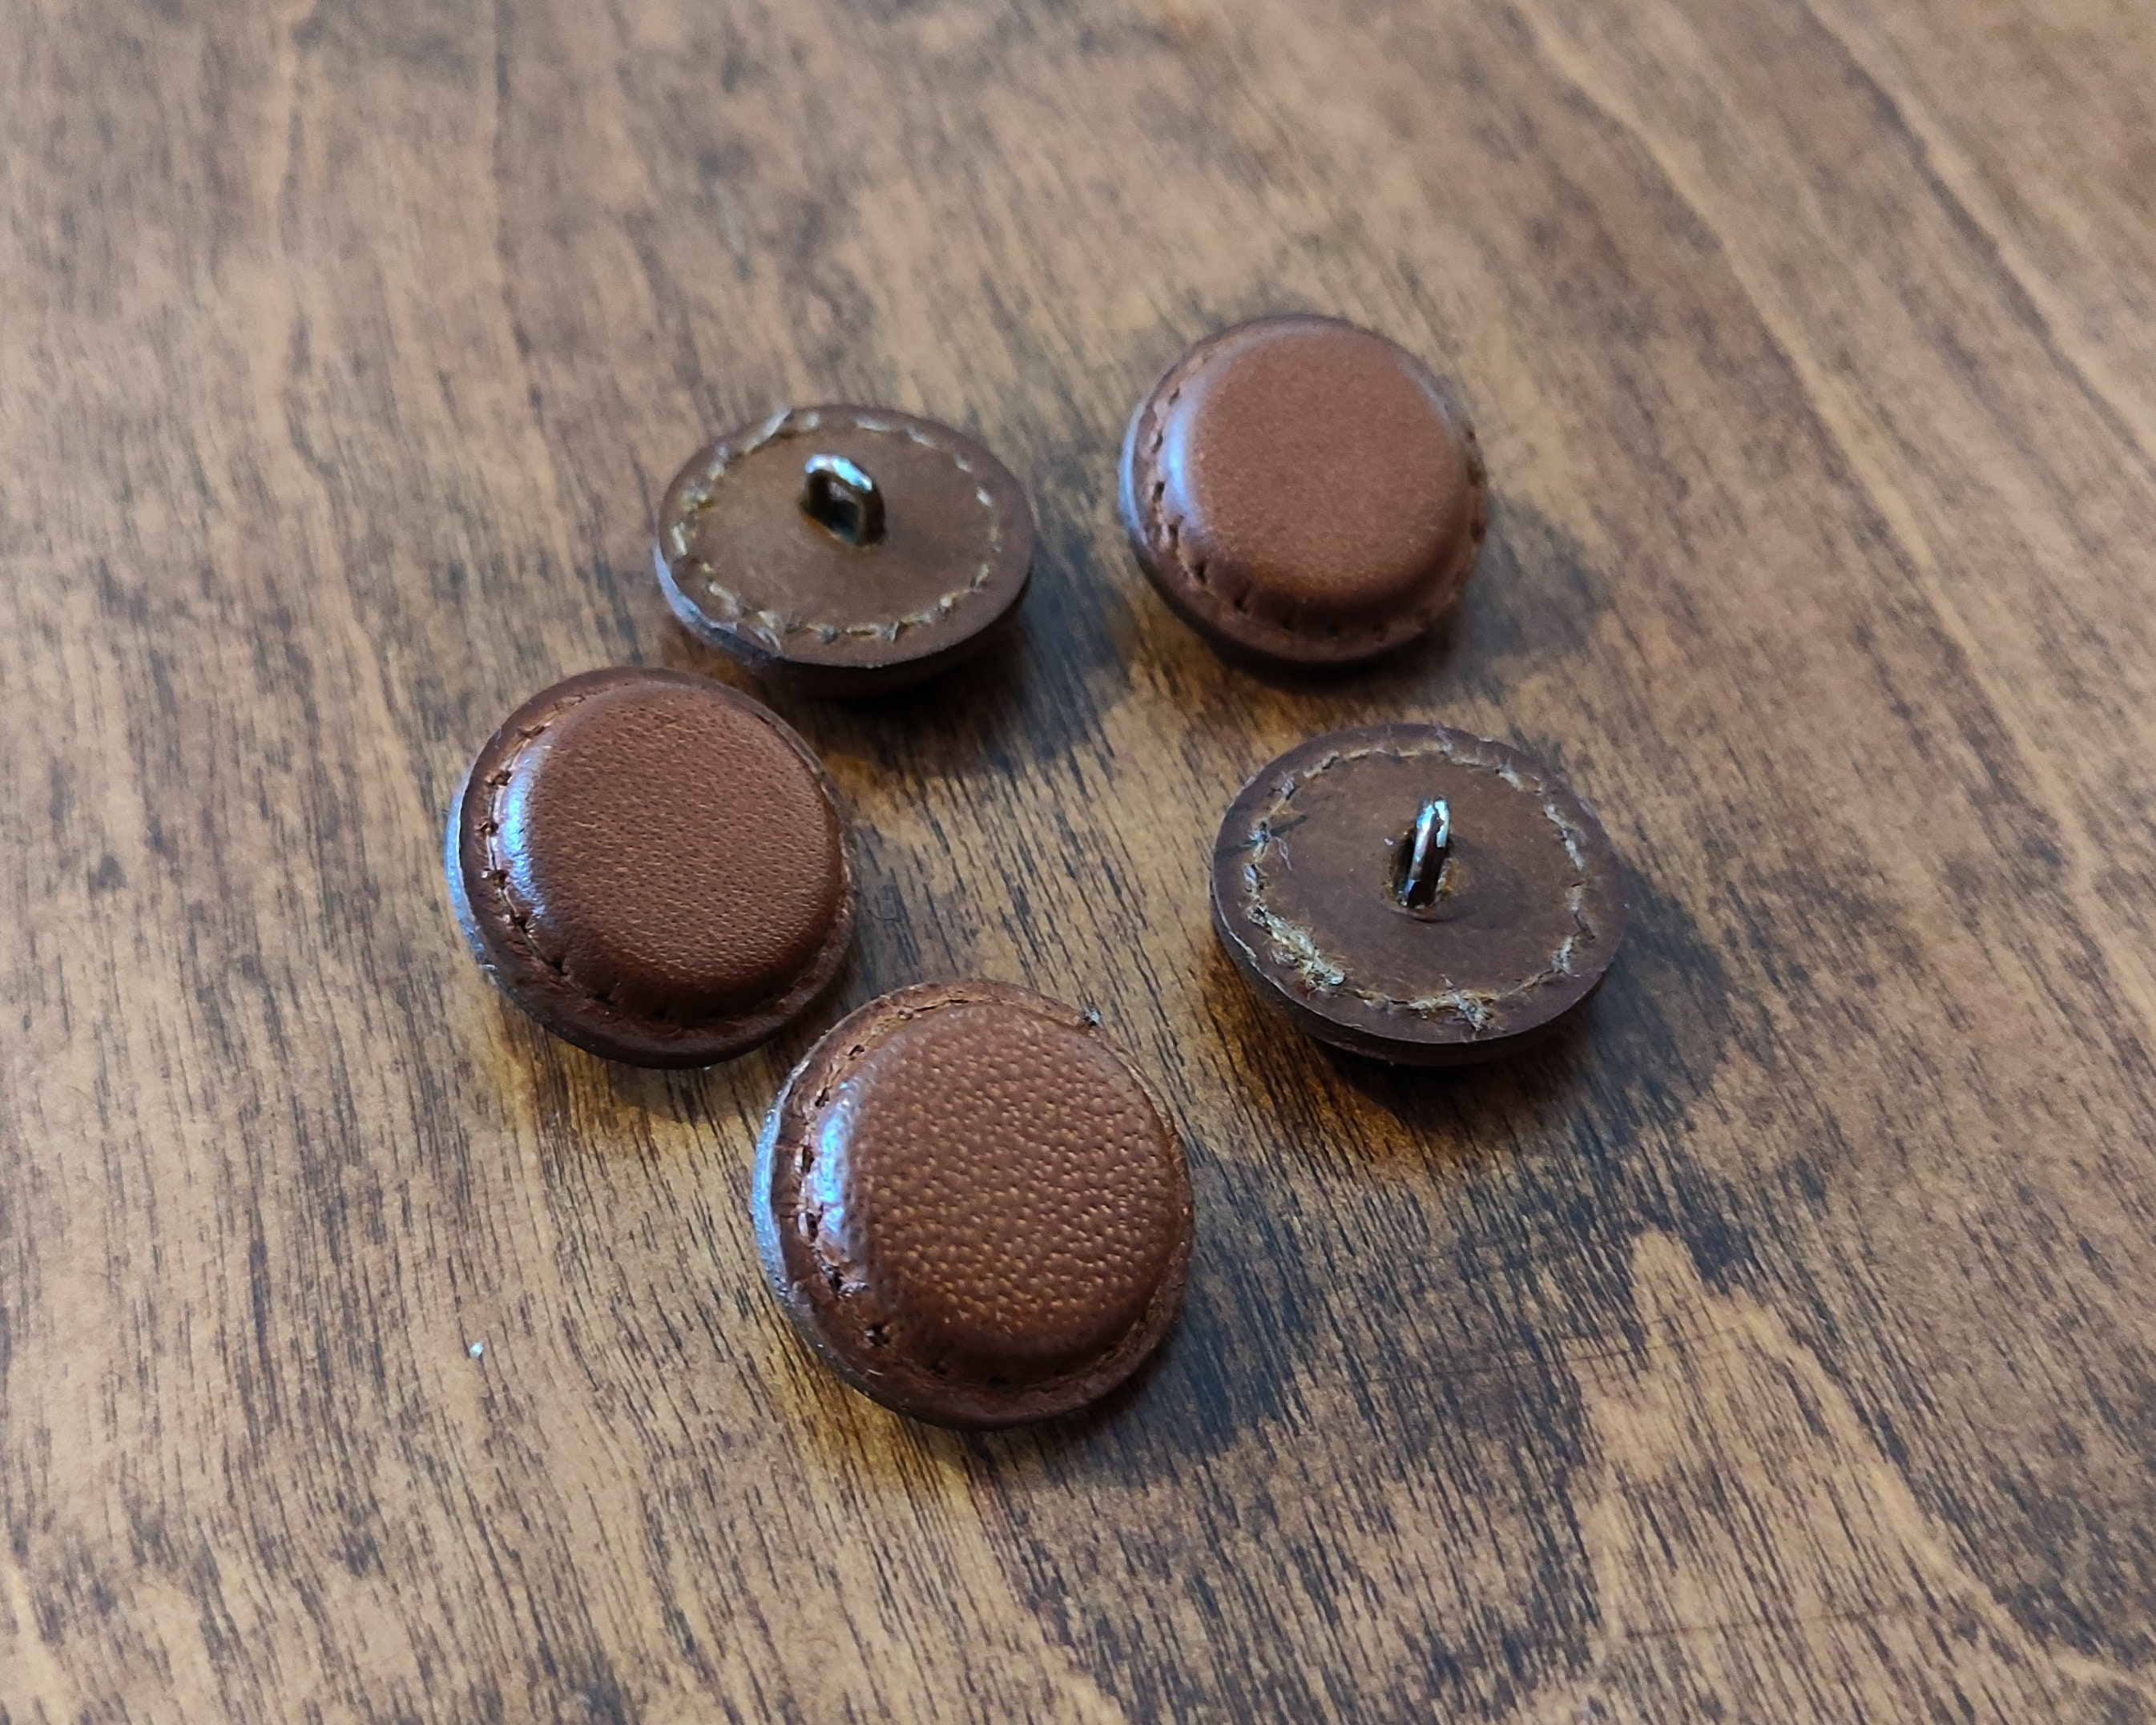 New lots of Real Leather Dark Brown Buttons size 11/16 = 17 mm lot # L2